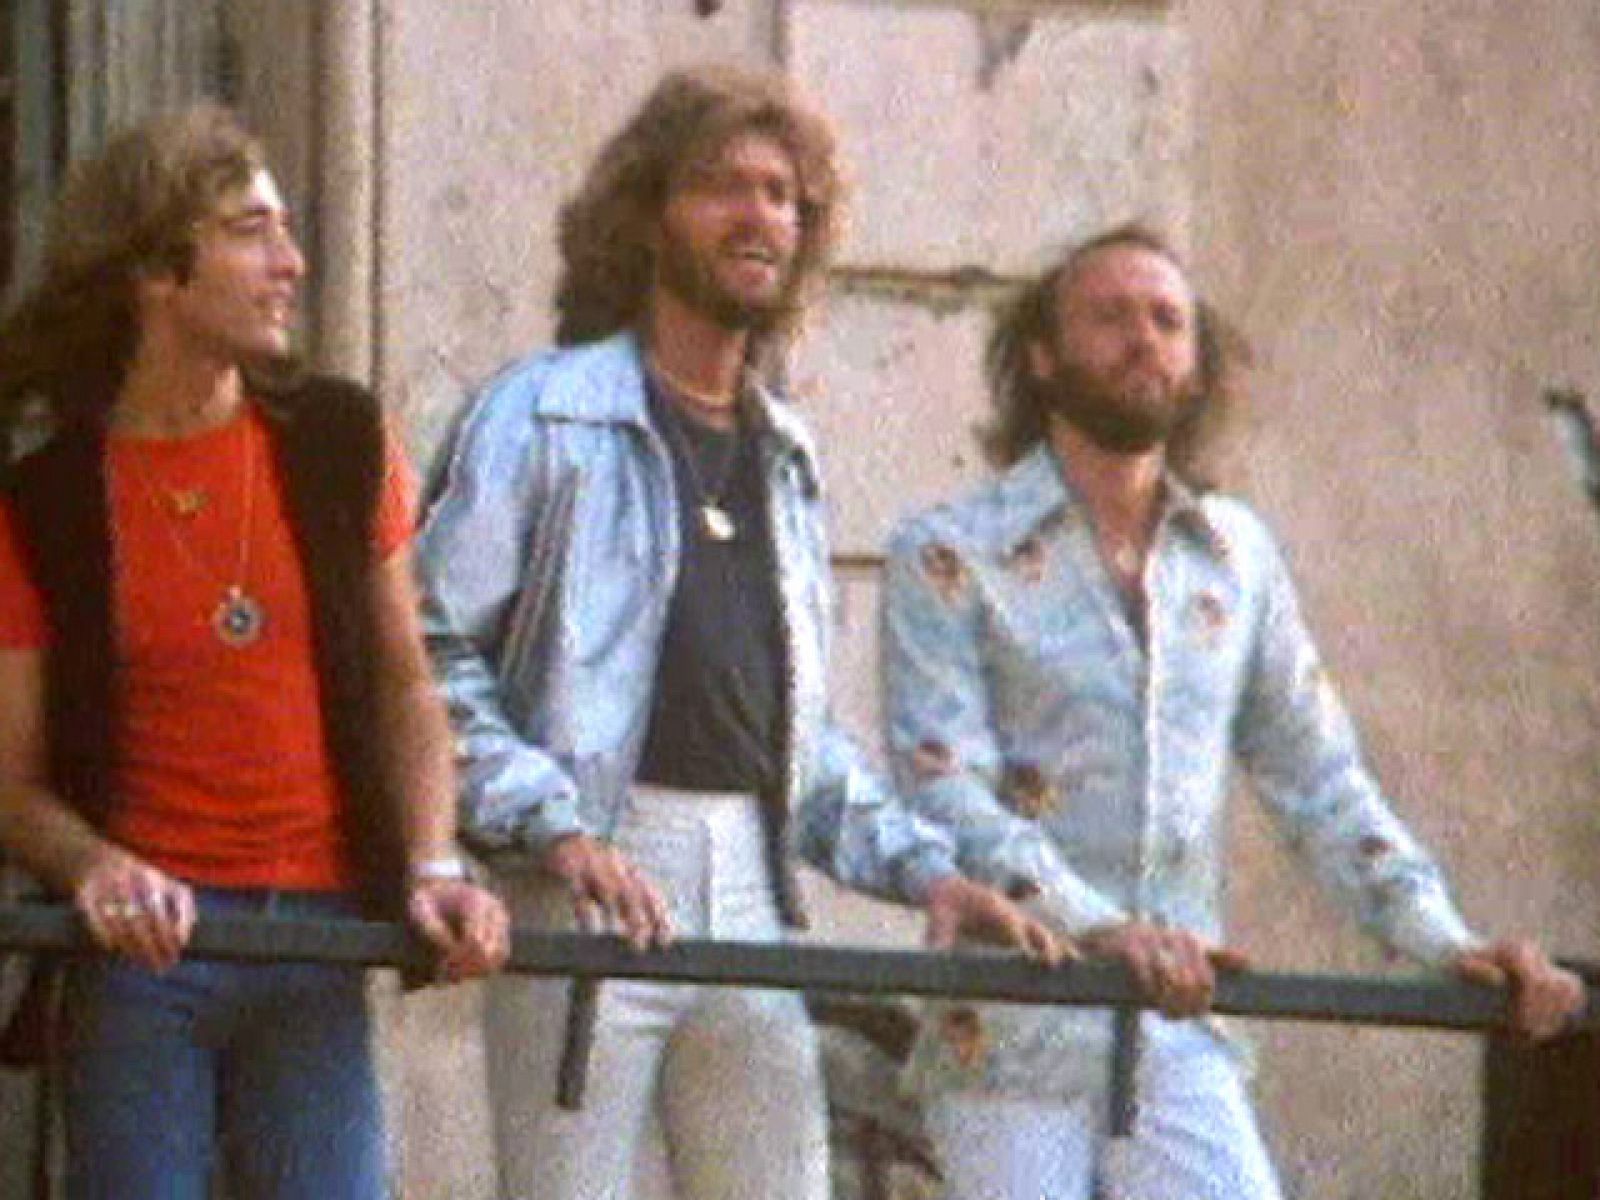 Cuéntame - Bee Gees: "Stayin' alive"